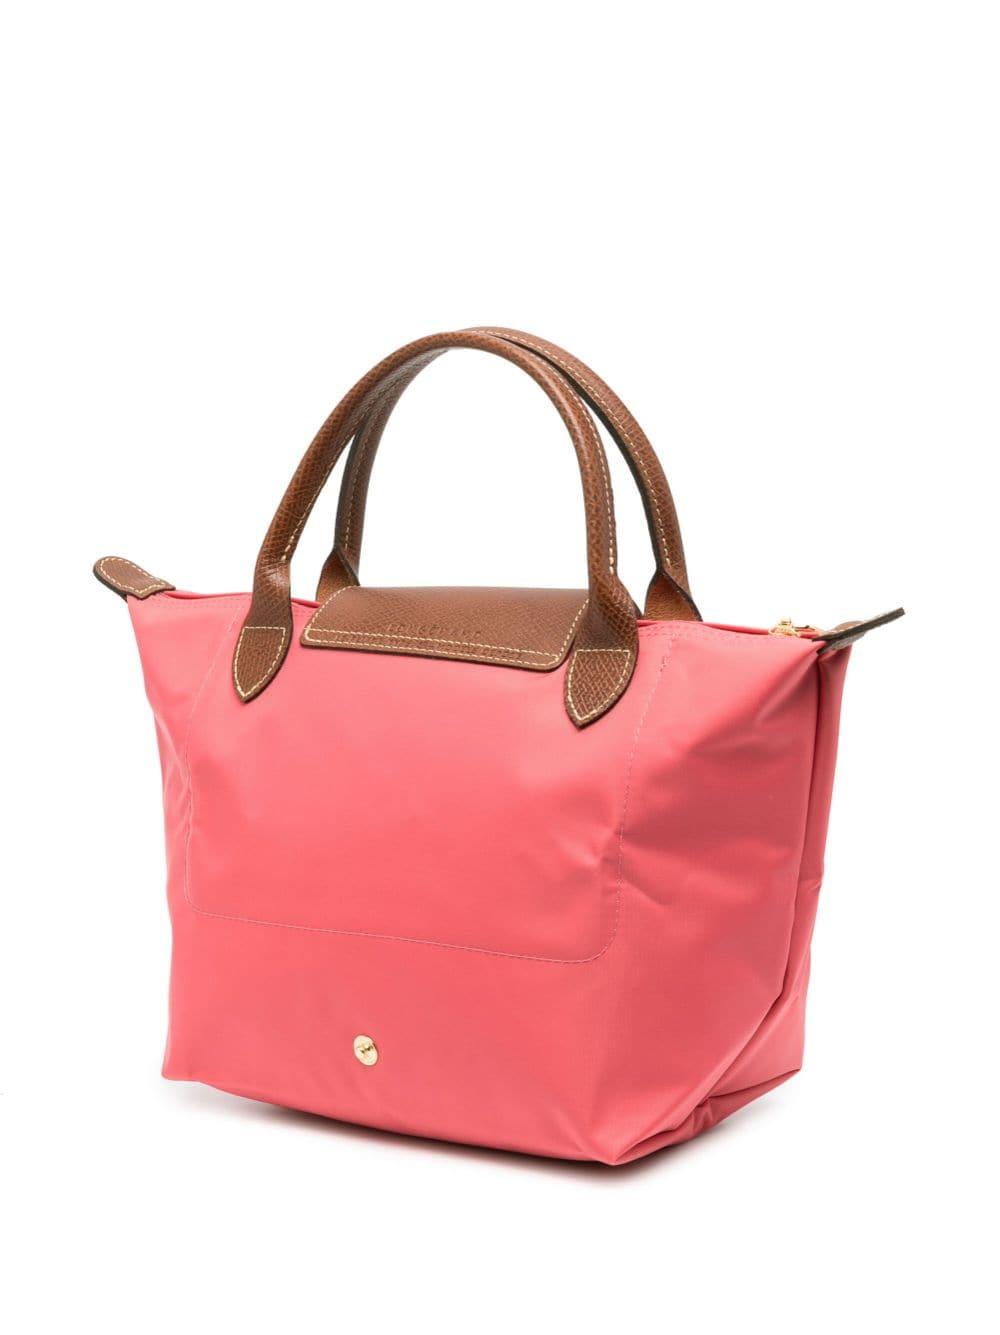 Longchamp Grenadine S Le Pliage Bag in Pink | Lyst